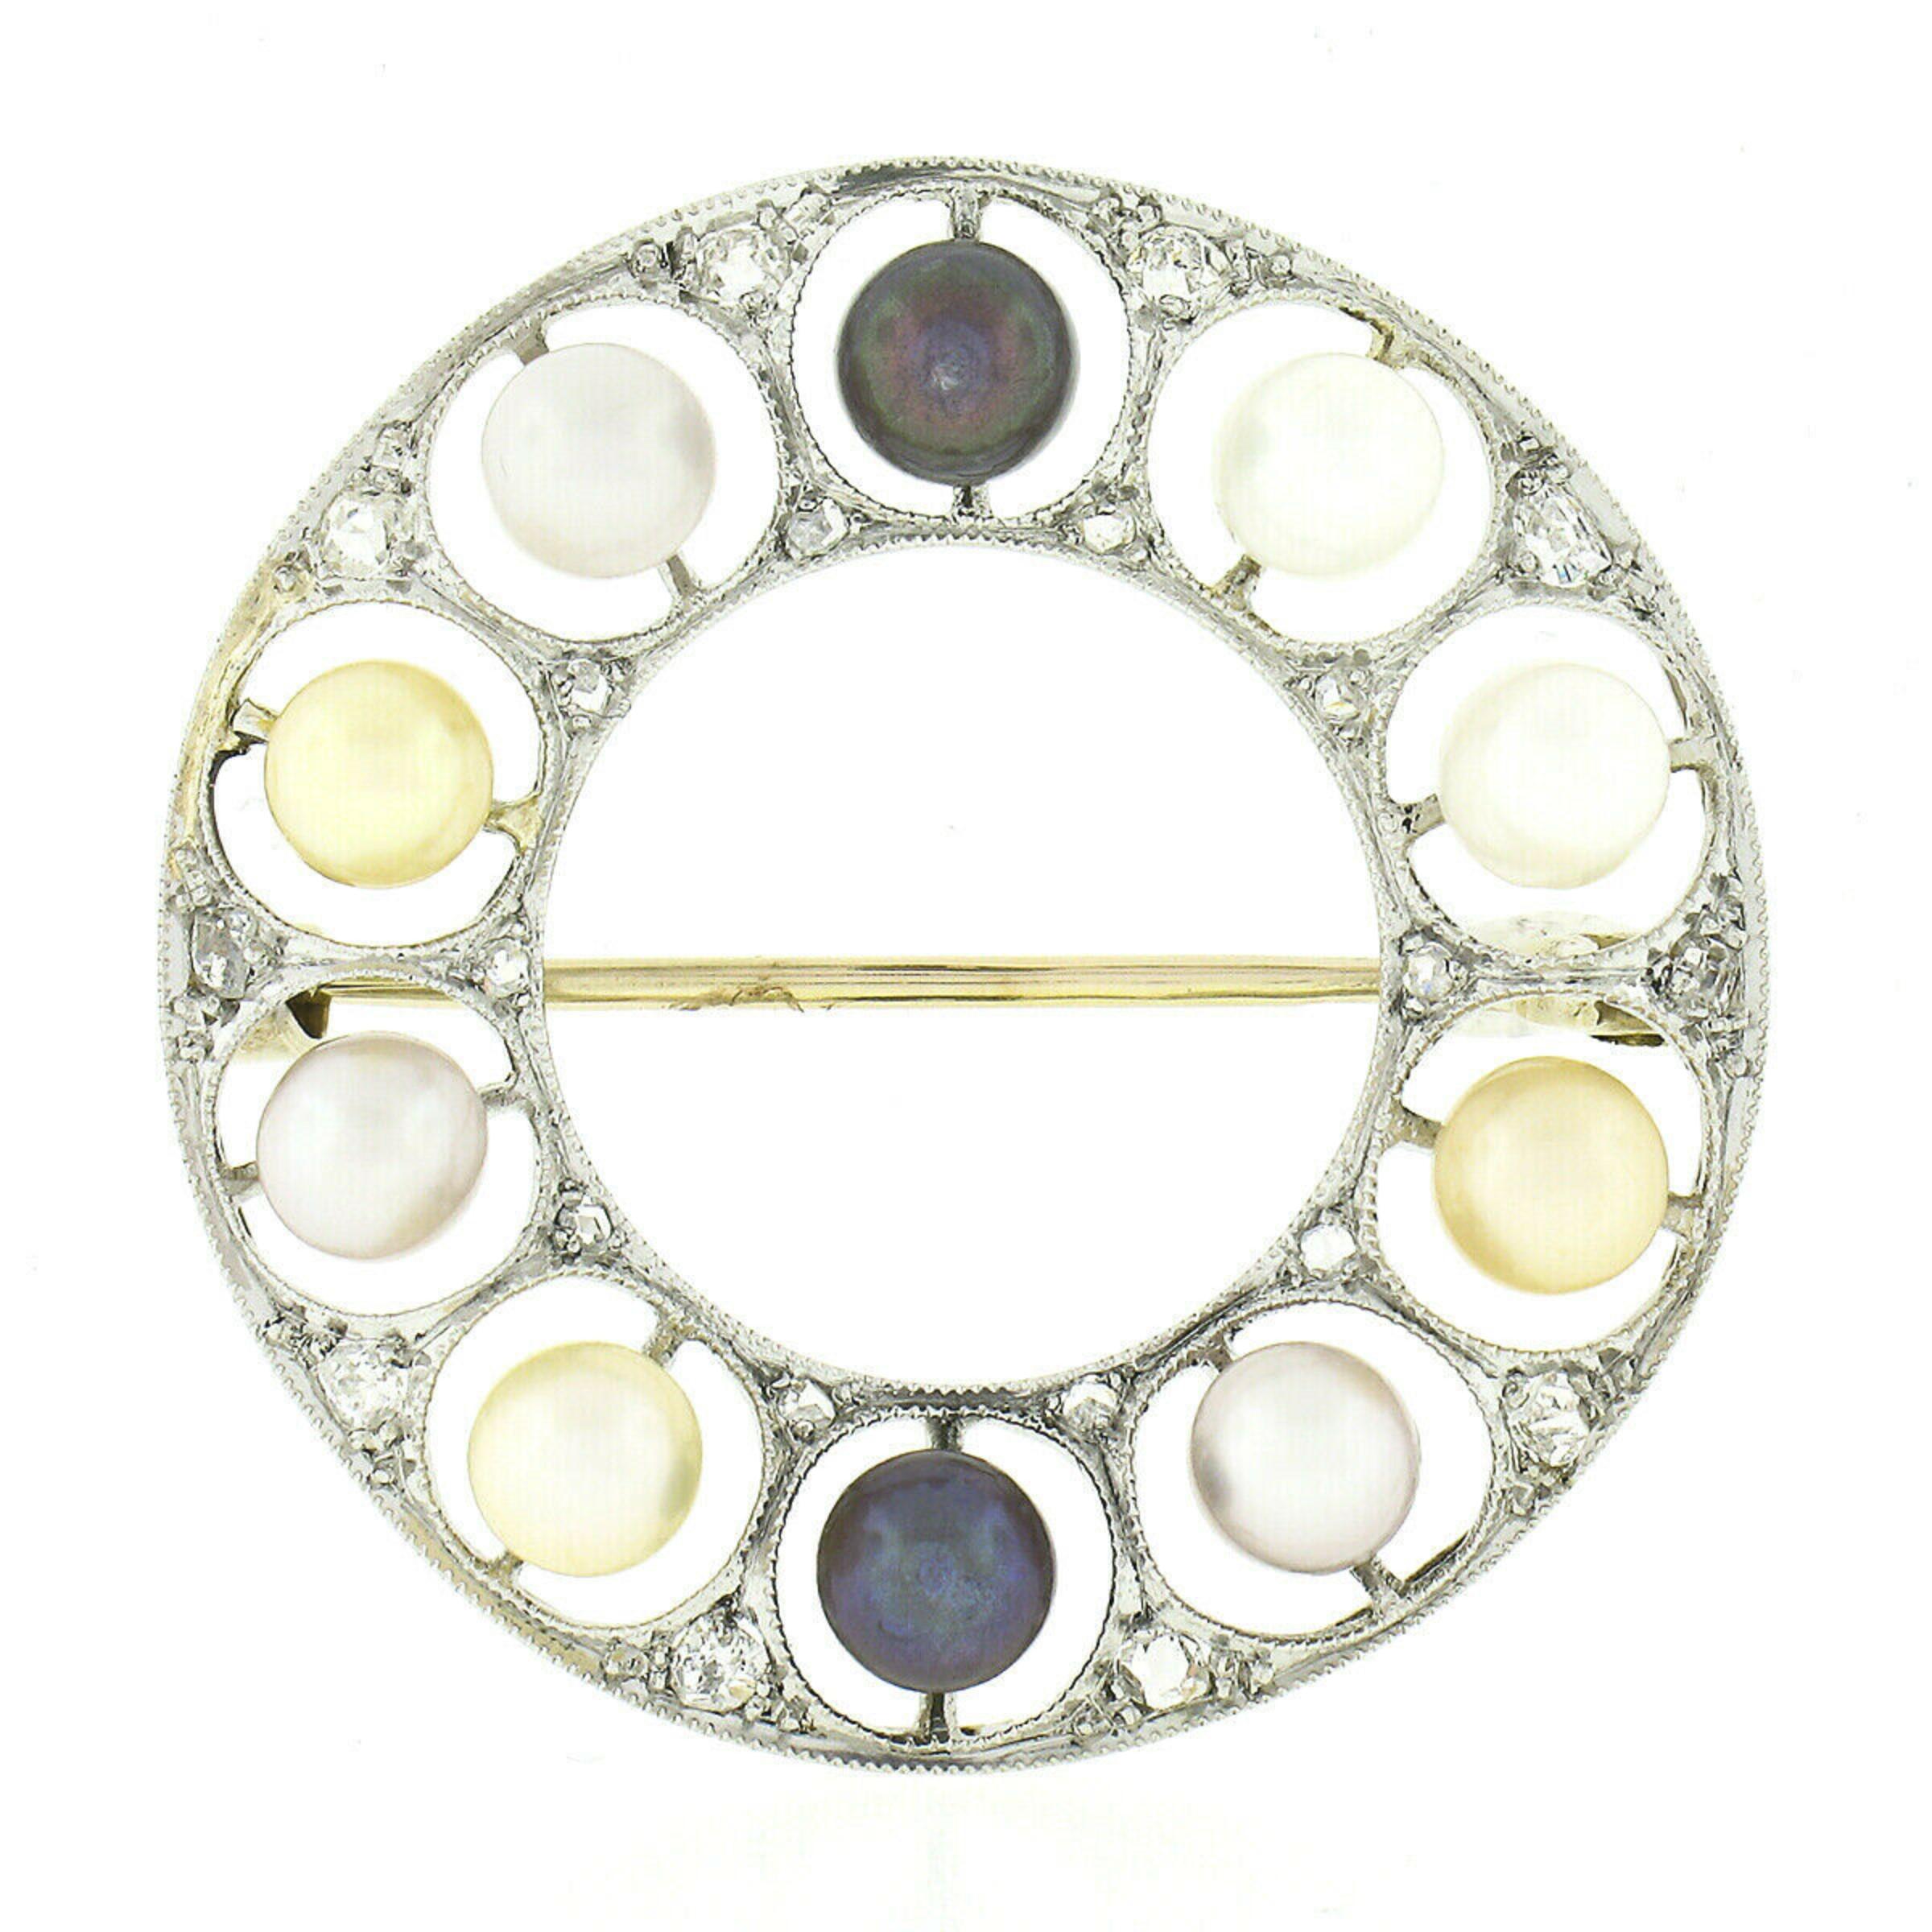 This beautiful antique pin brooch was crafted from solid platinum with a solid 14k yellow gold pin backing and features a circle wreath design that is adorned with fine pearls and diamonds throughout. The gorgeous pearls are well matched in size and